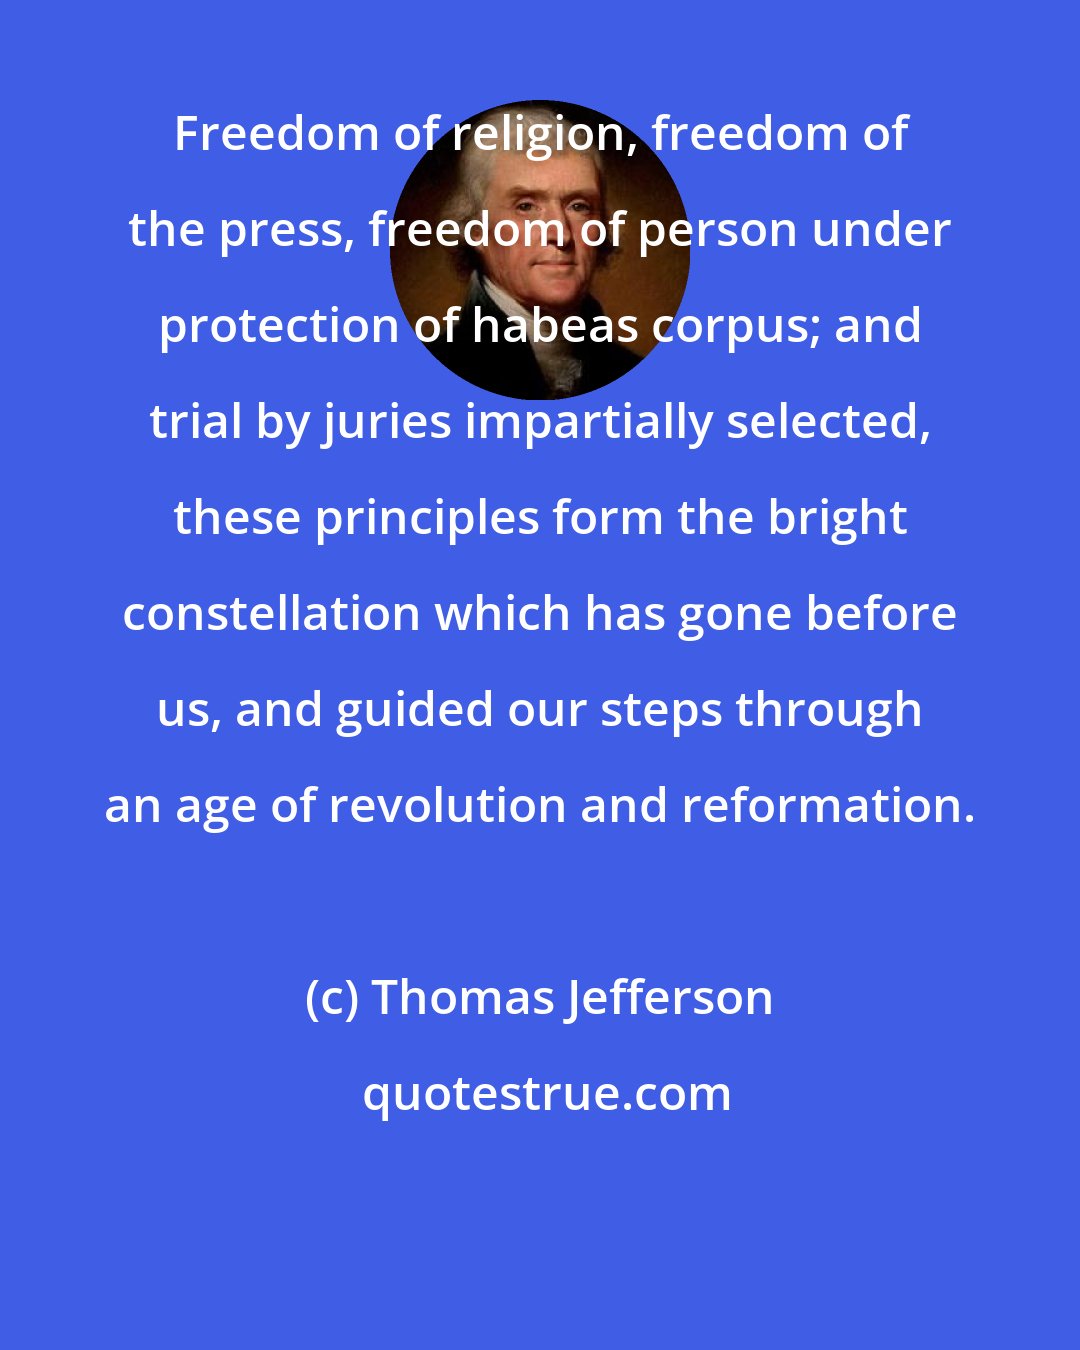 Thomas Jefferson: Freedom of religion, freedom of the press, freedom of person under protection of habeas corpus; and trial by juries impartially selected, these principles form the bright constellation which has gone before us, and guided our steps through an age of revolution and reformation.